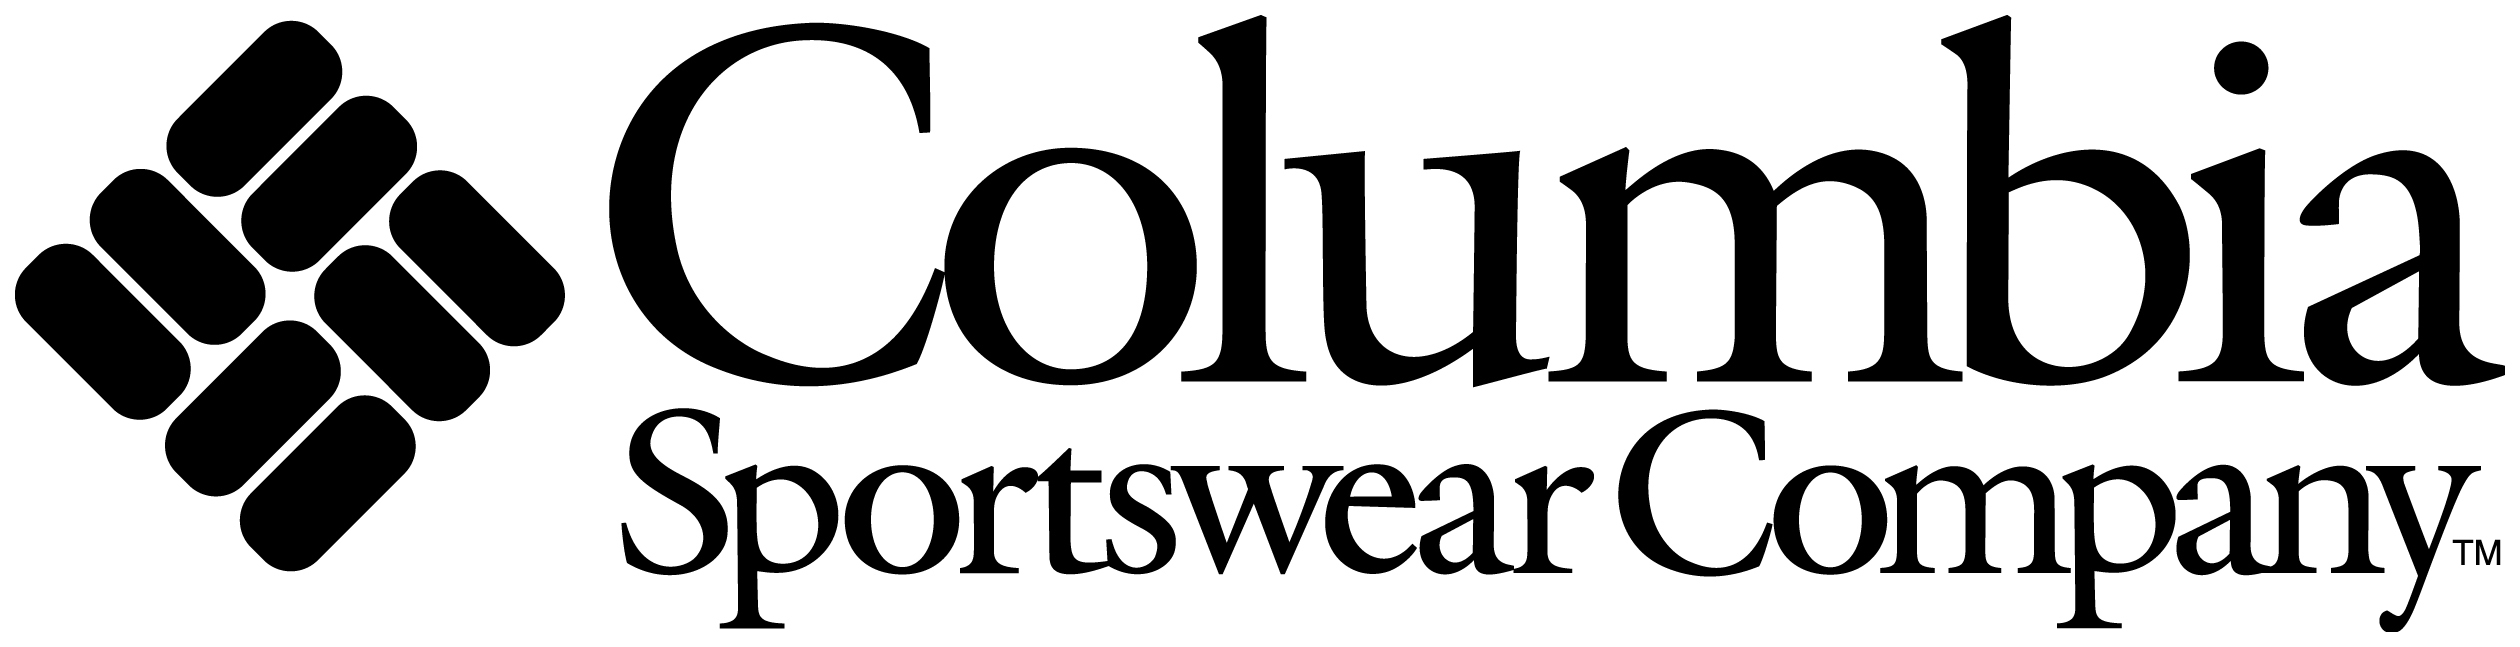 Columbia Sportswear Company Announces Upcoming Departure of prAna Brand CEO Scott Kerslake | Business Wire